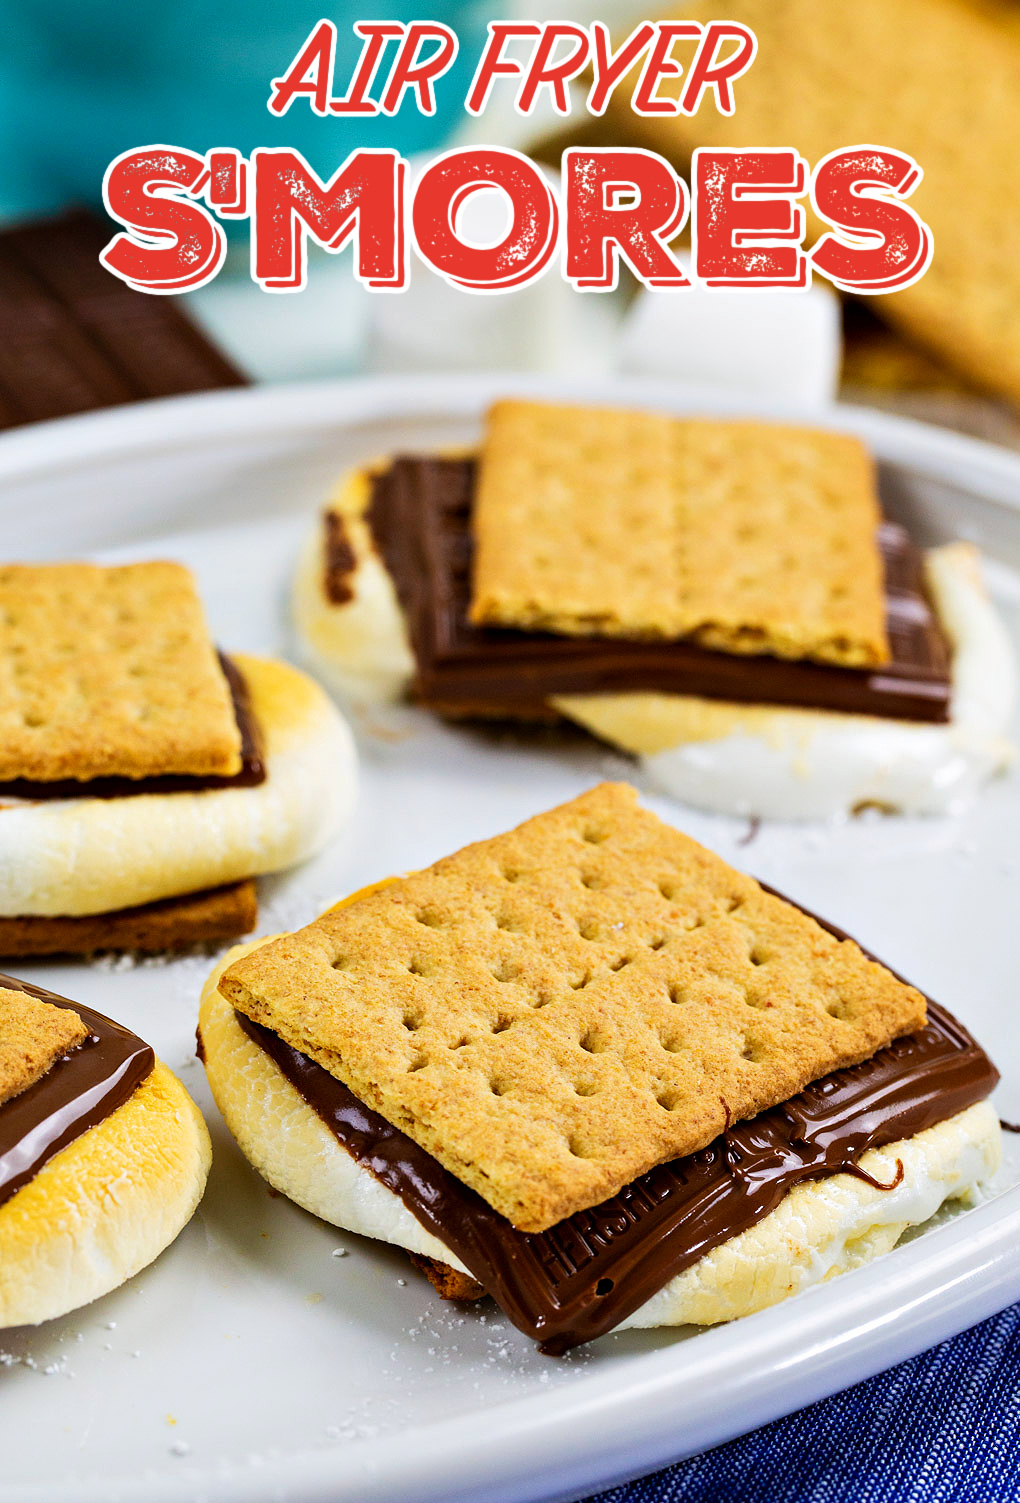 Air fryer S'mores on a serving plate.